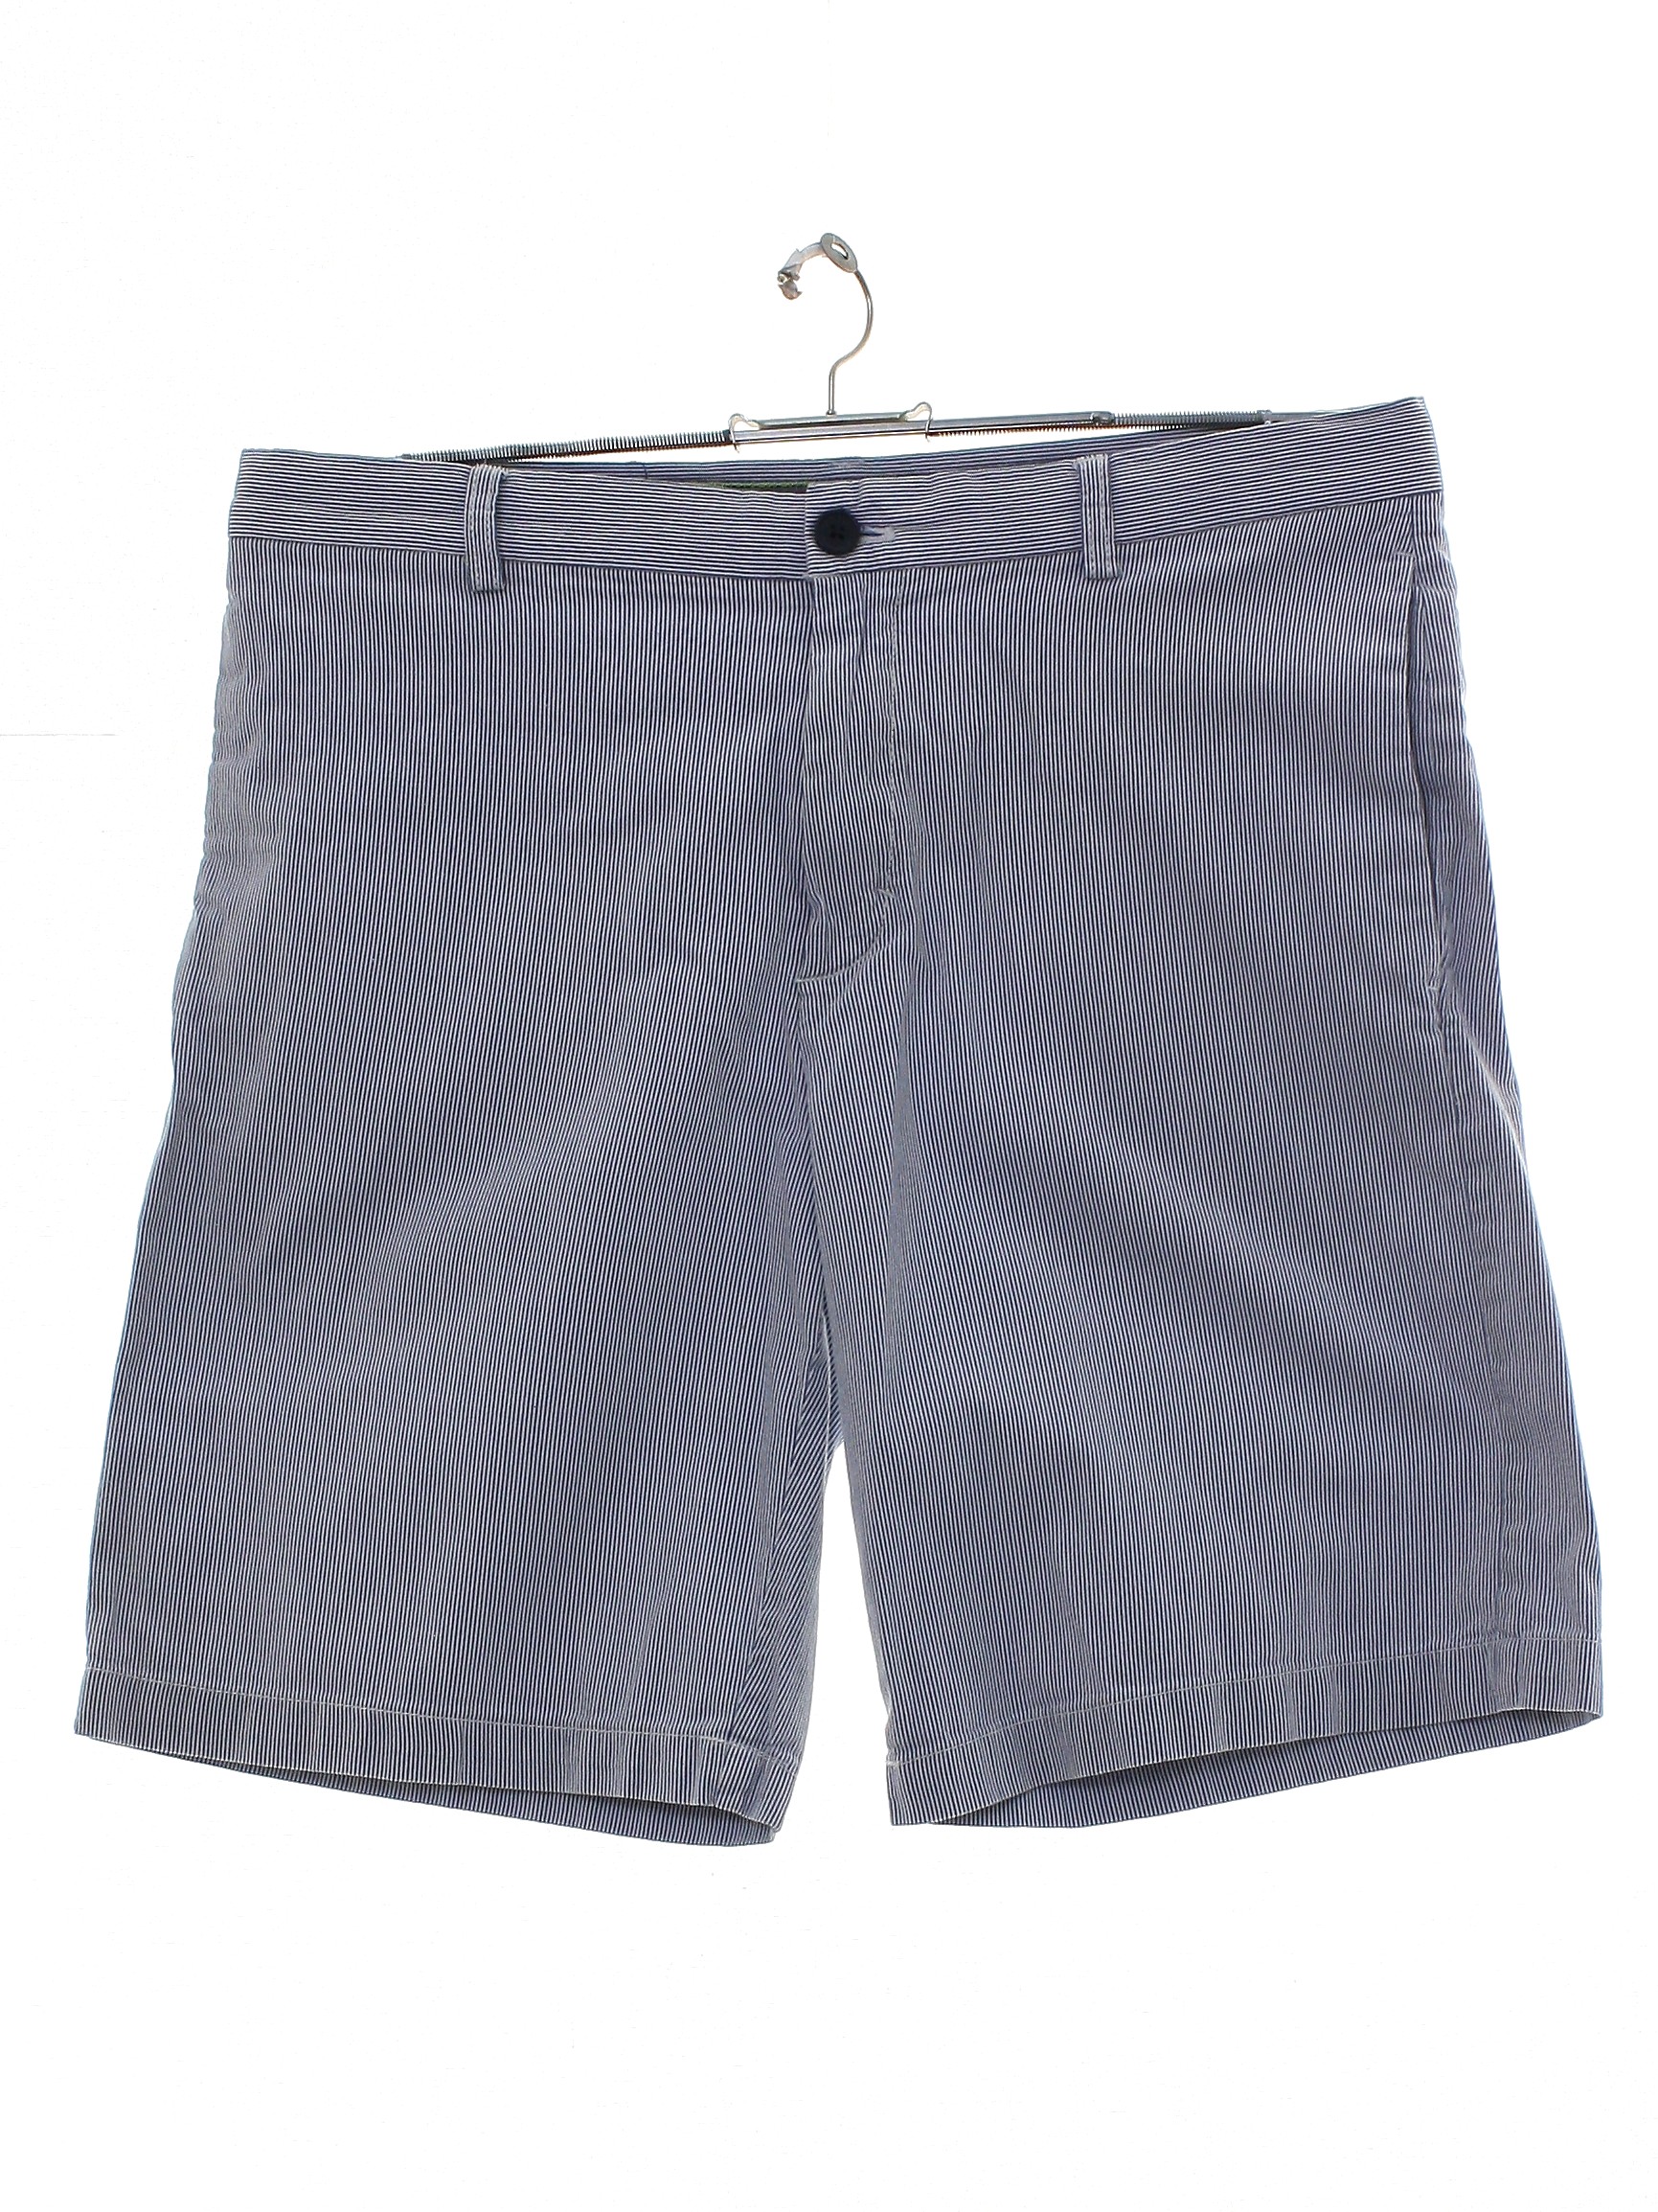 Shorts: 90s (early y2k) -Izod- Mens dark blue background with white ...